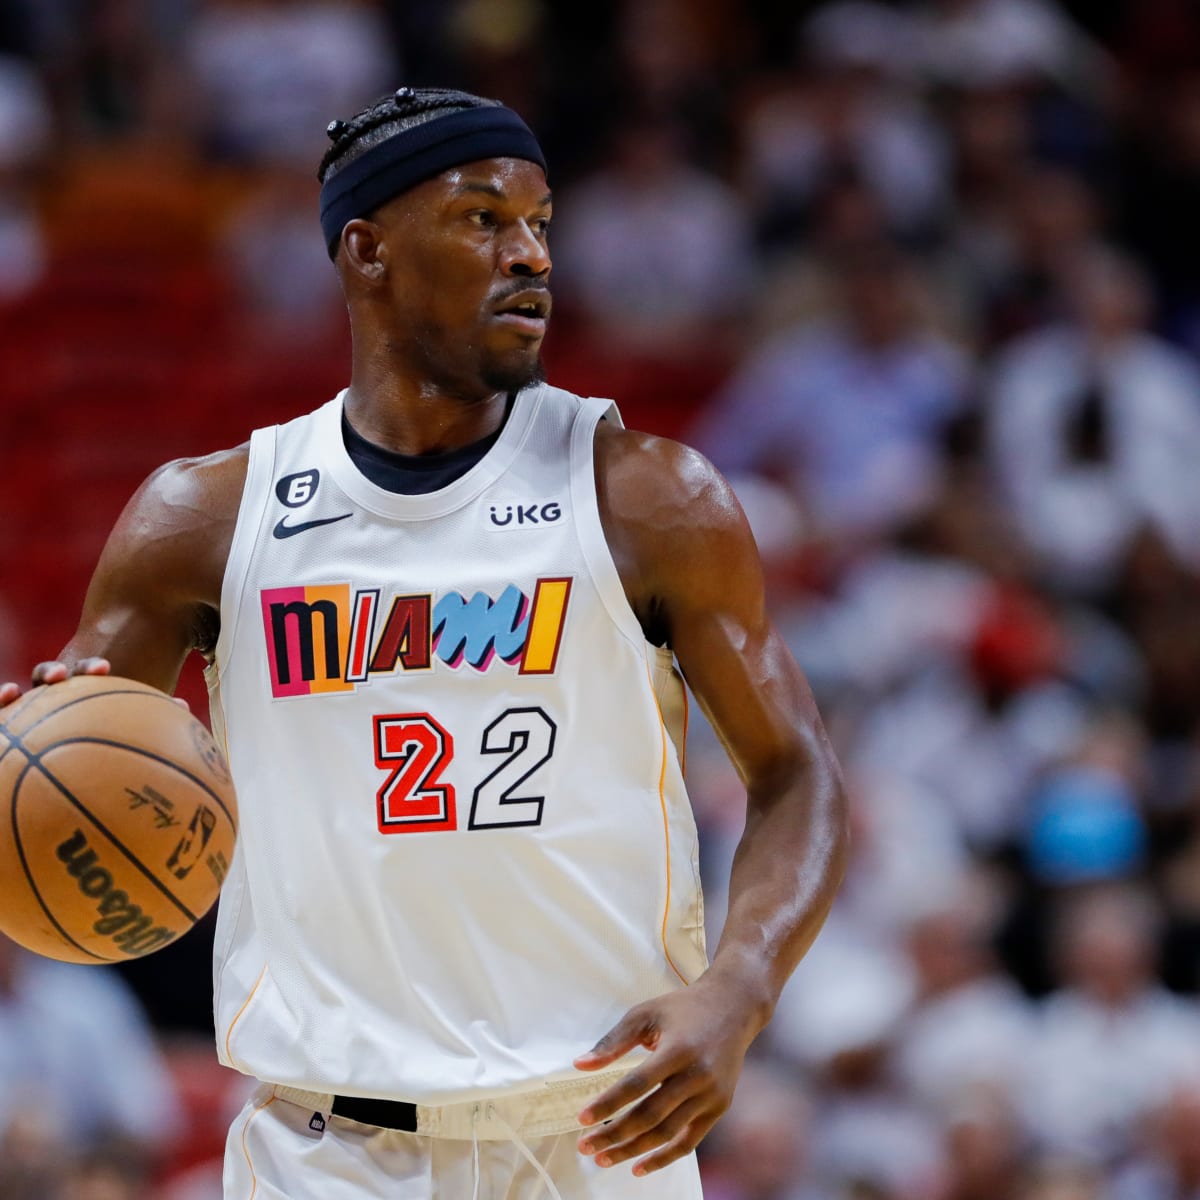 Jimmy Butler And Miami Heat Can Gloat Over Haters, But Others Can't